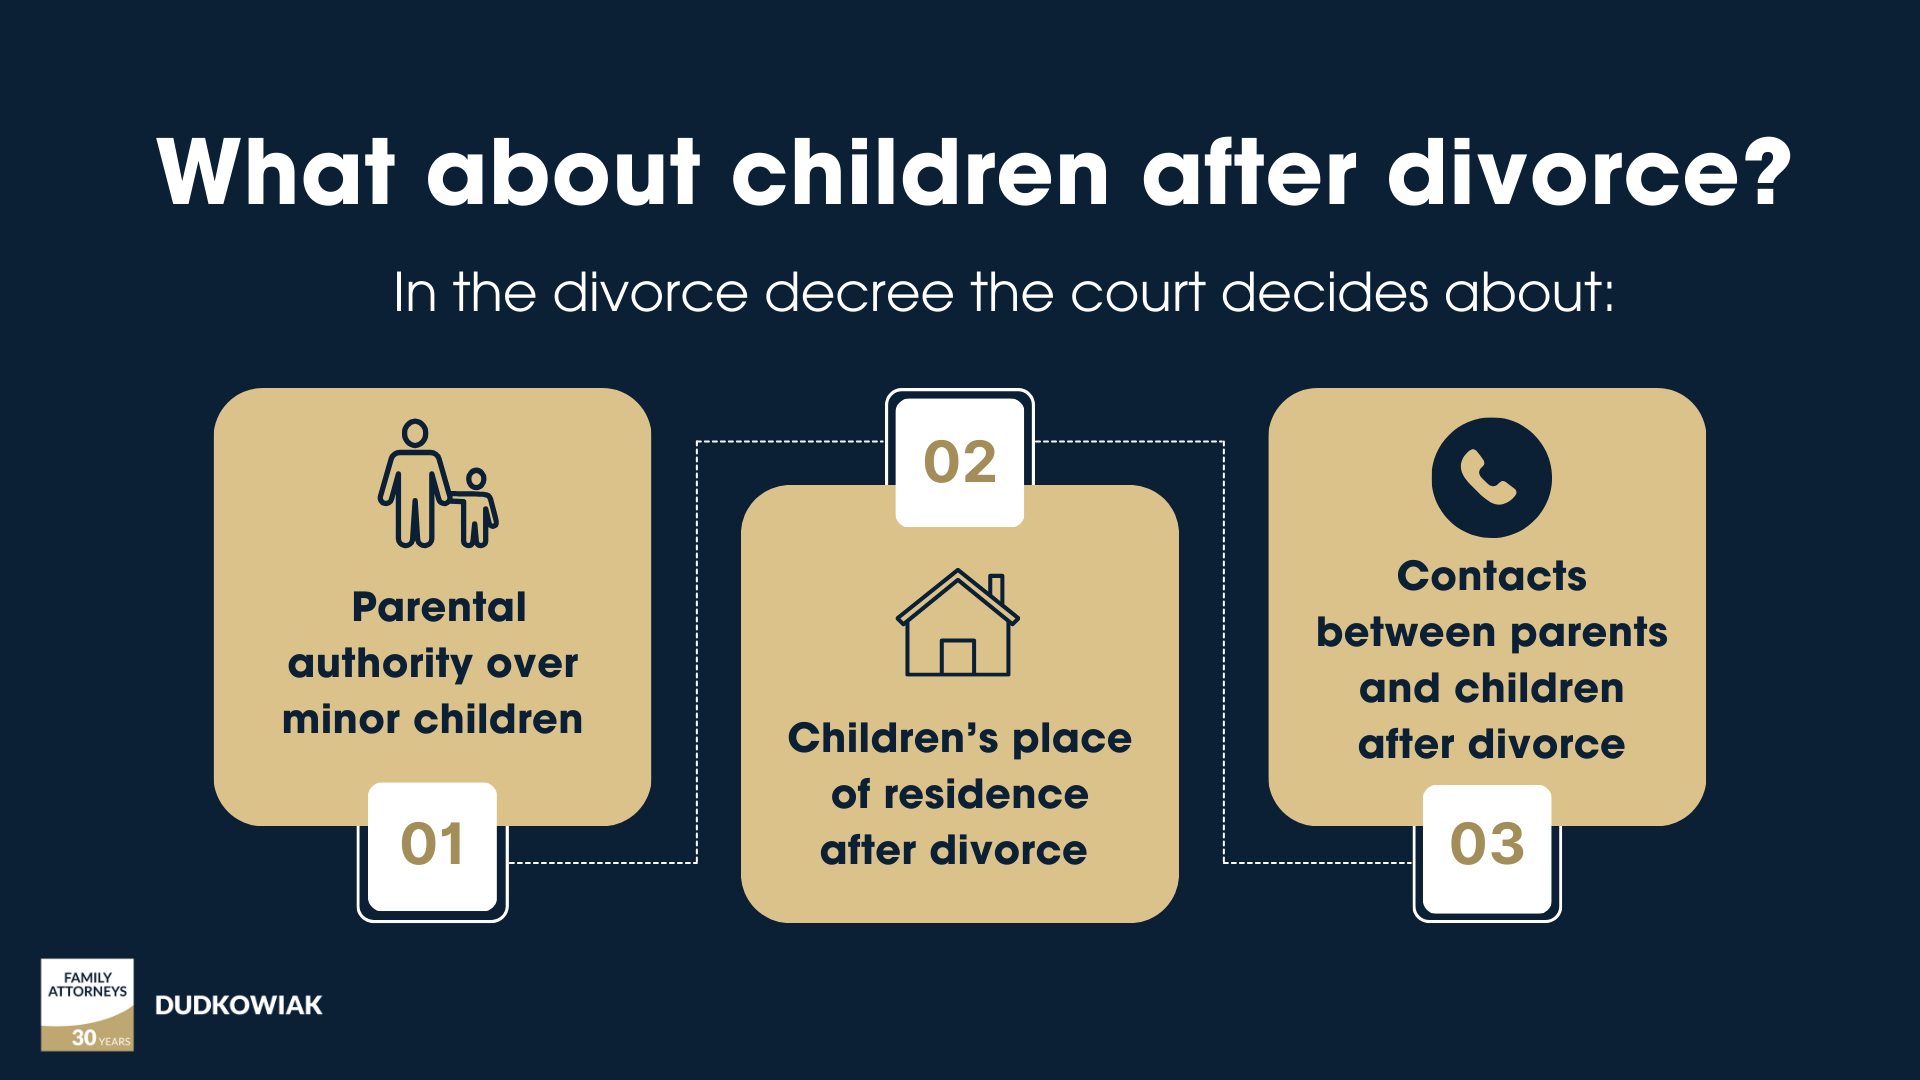 In the divorce decree the court decides about: